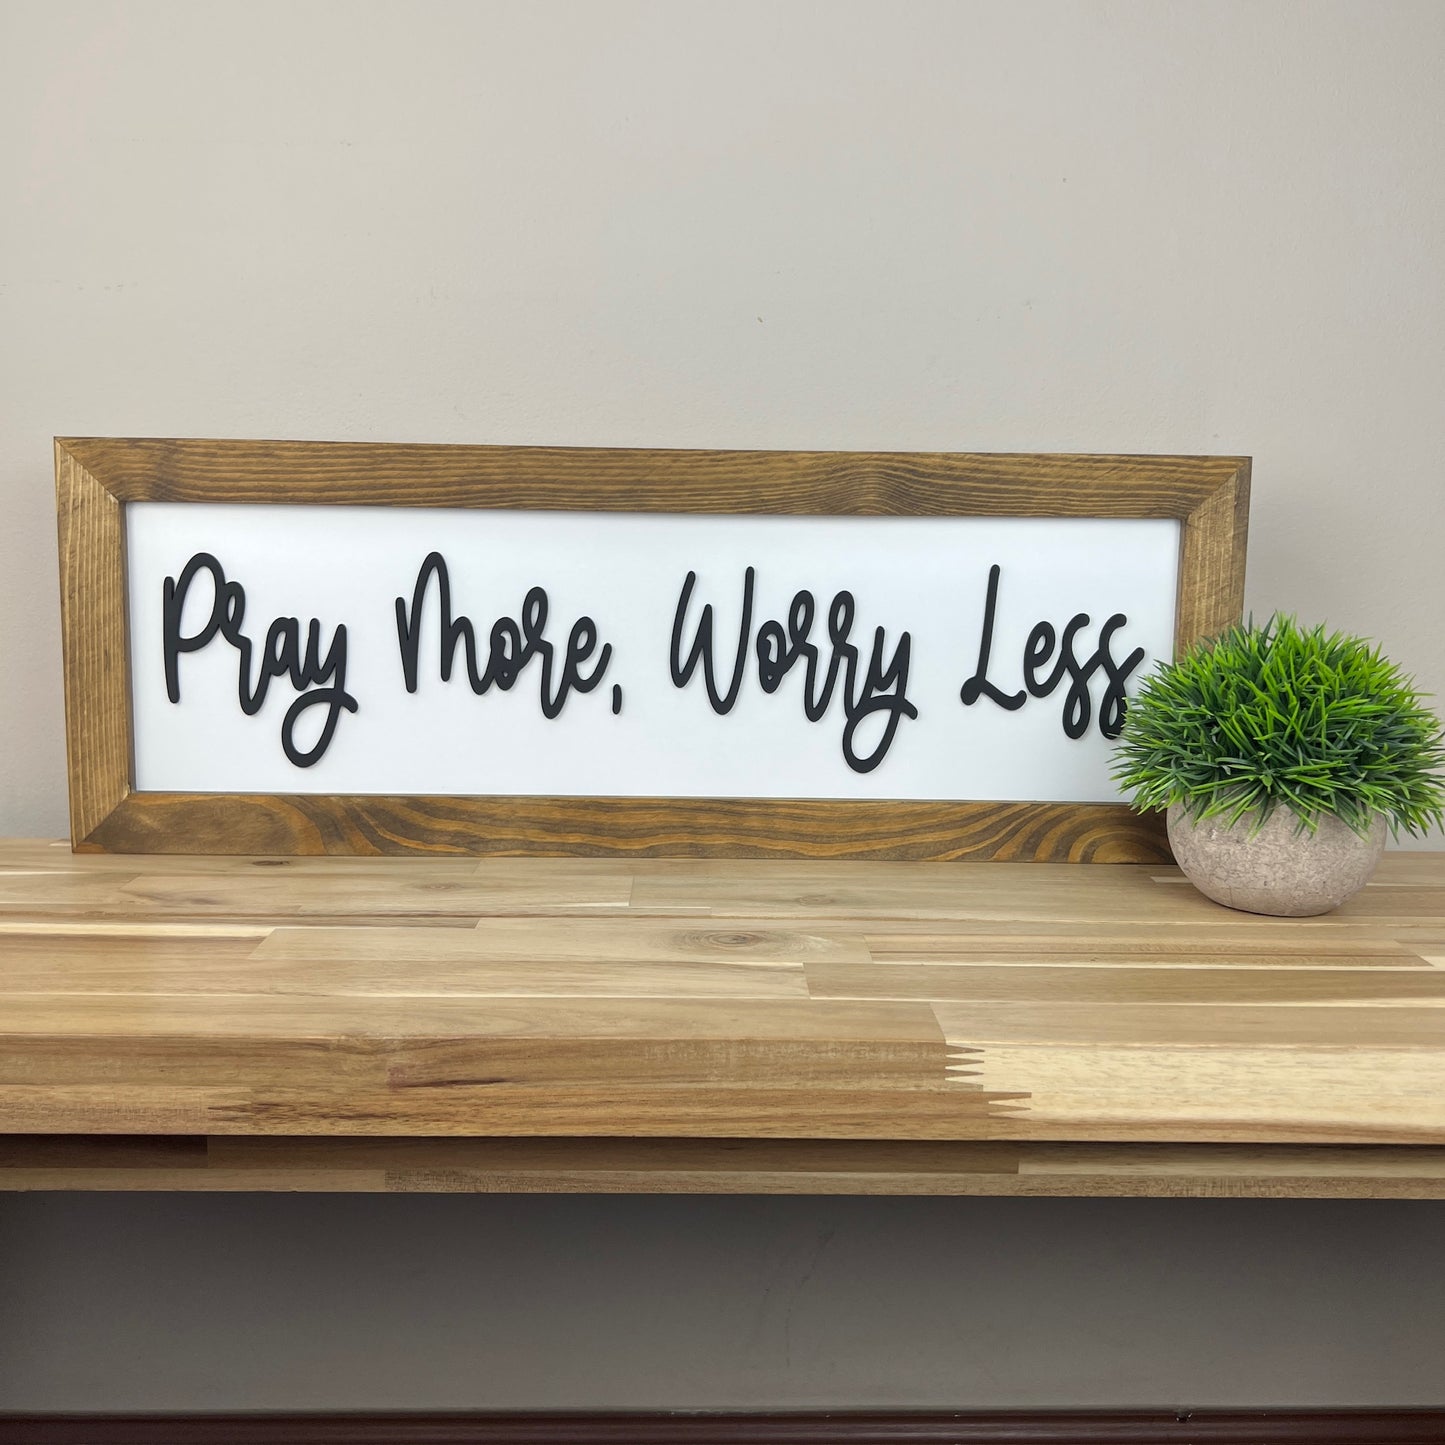 Pray More, Worry Less | 8x23 inch Wood Sign